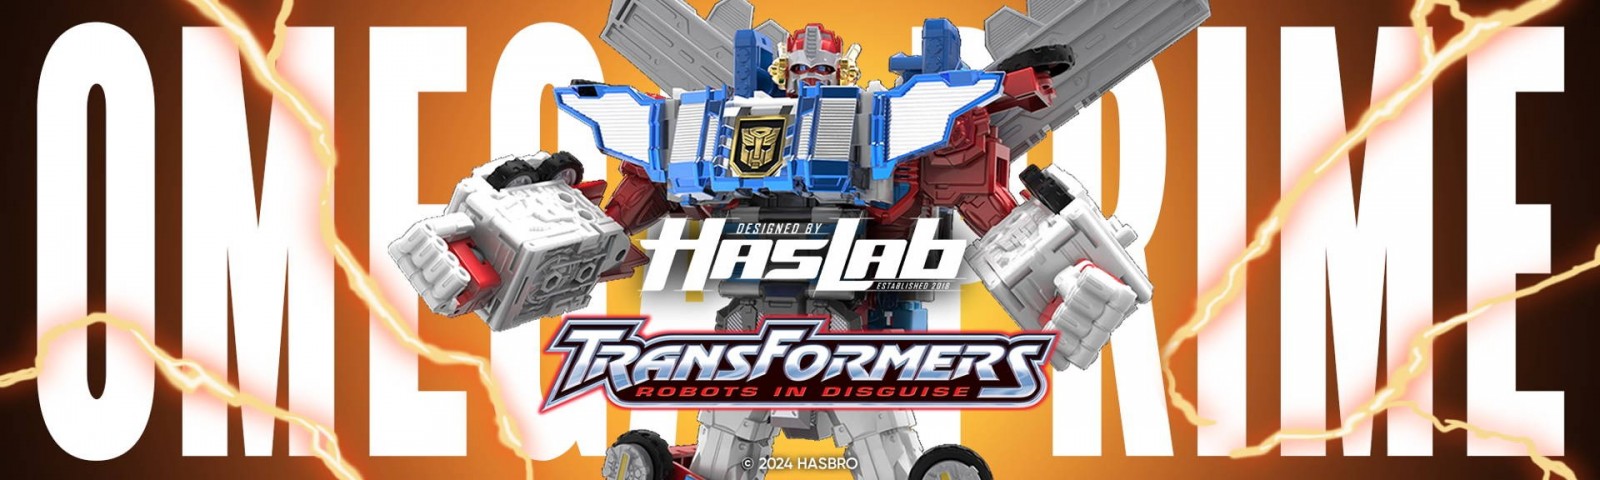 Transformers News: Twincast / Podcast Episode #343 "In the Future Year 2000"